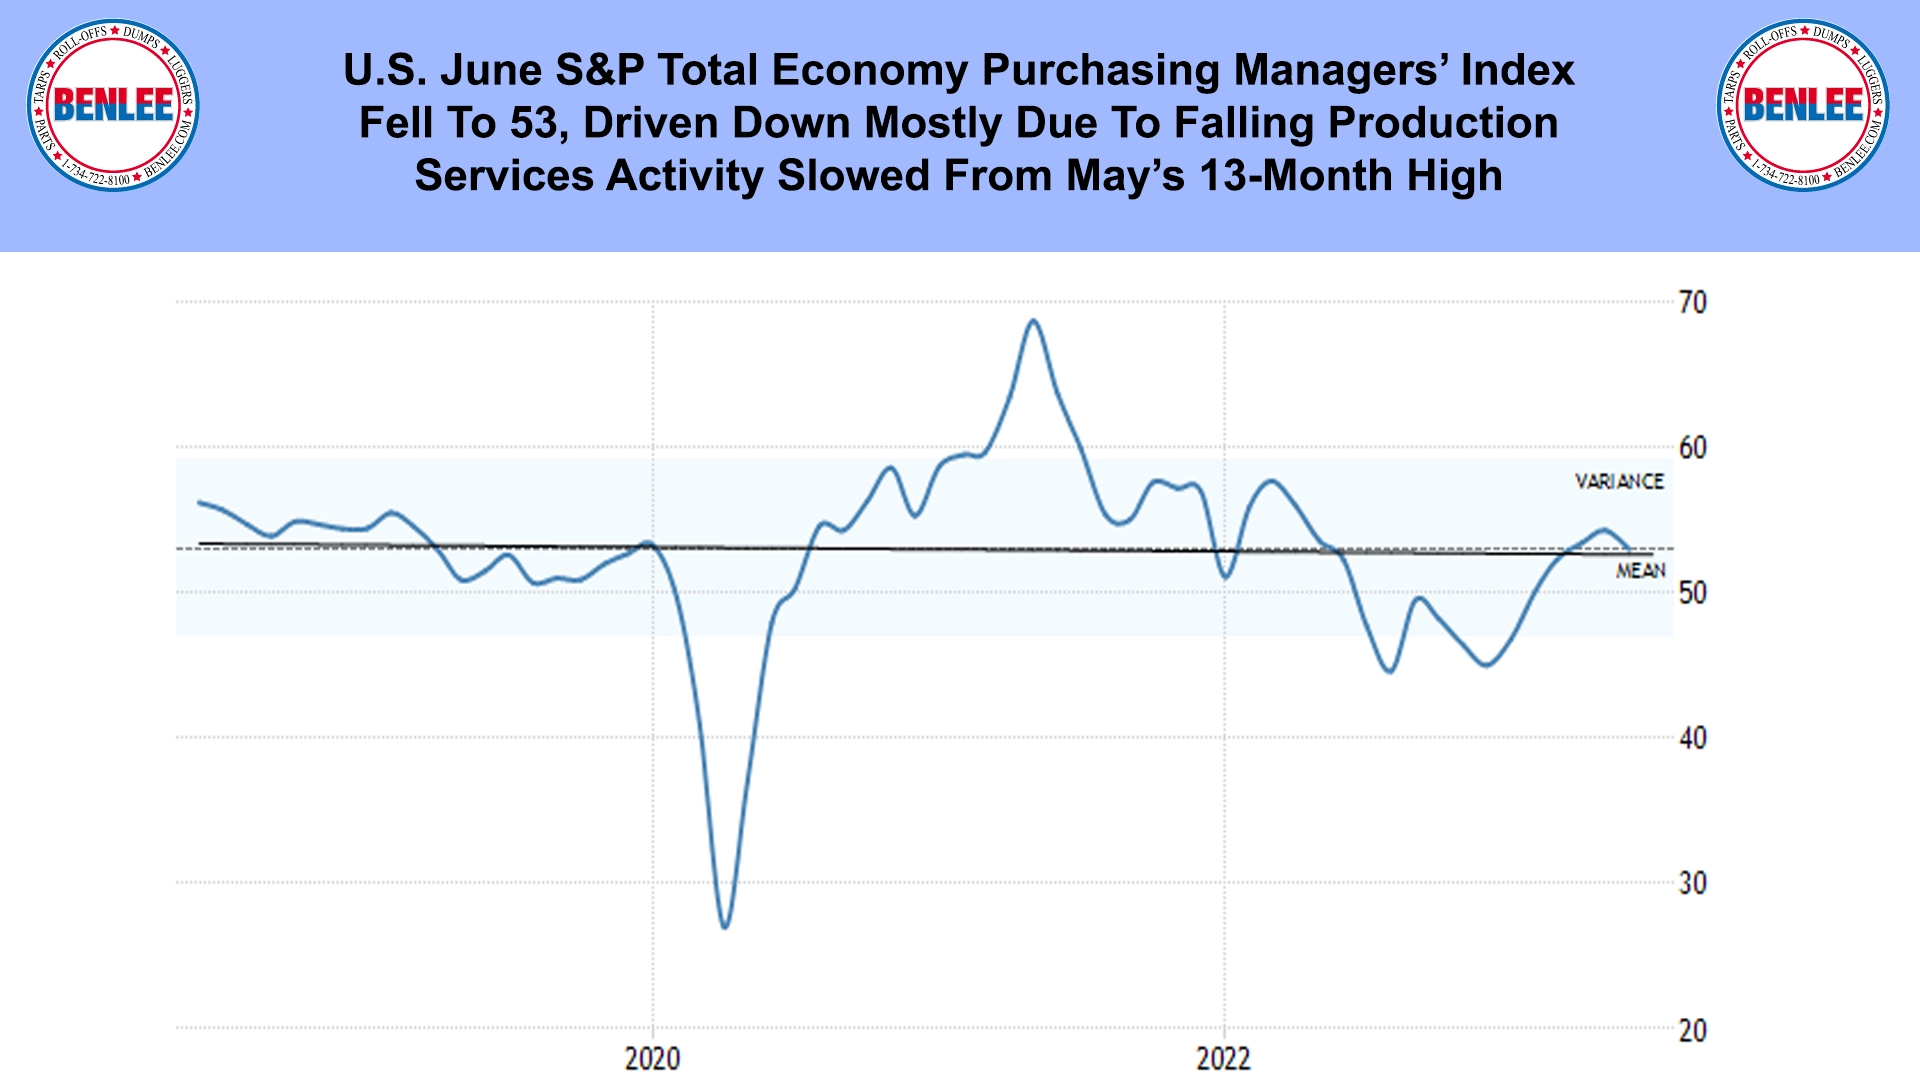 U.S. June S&P Total Economy Purchasing Managers’ Index